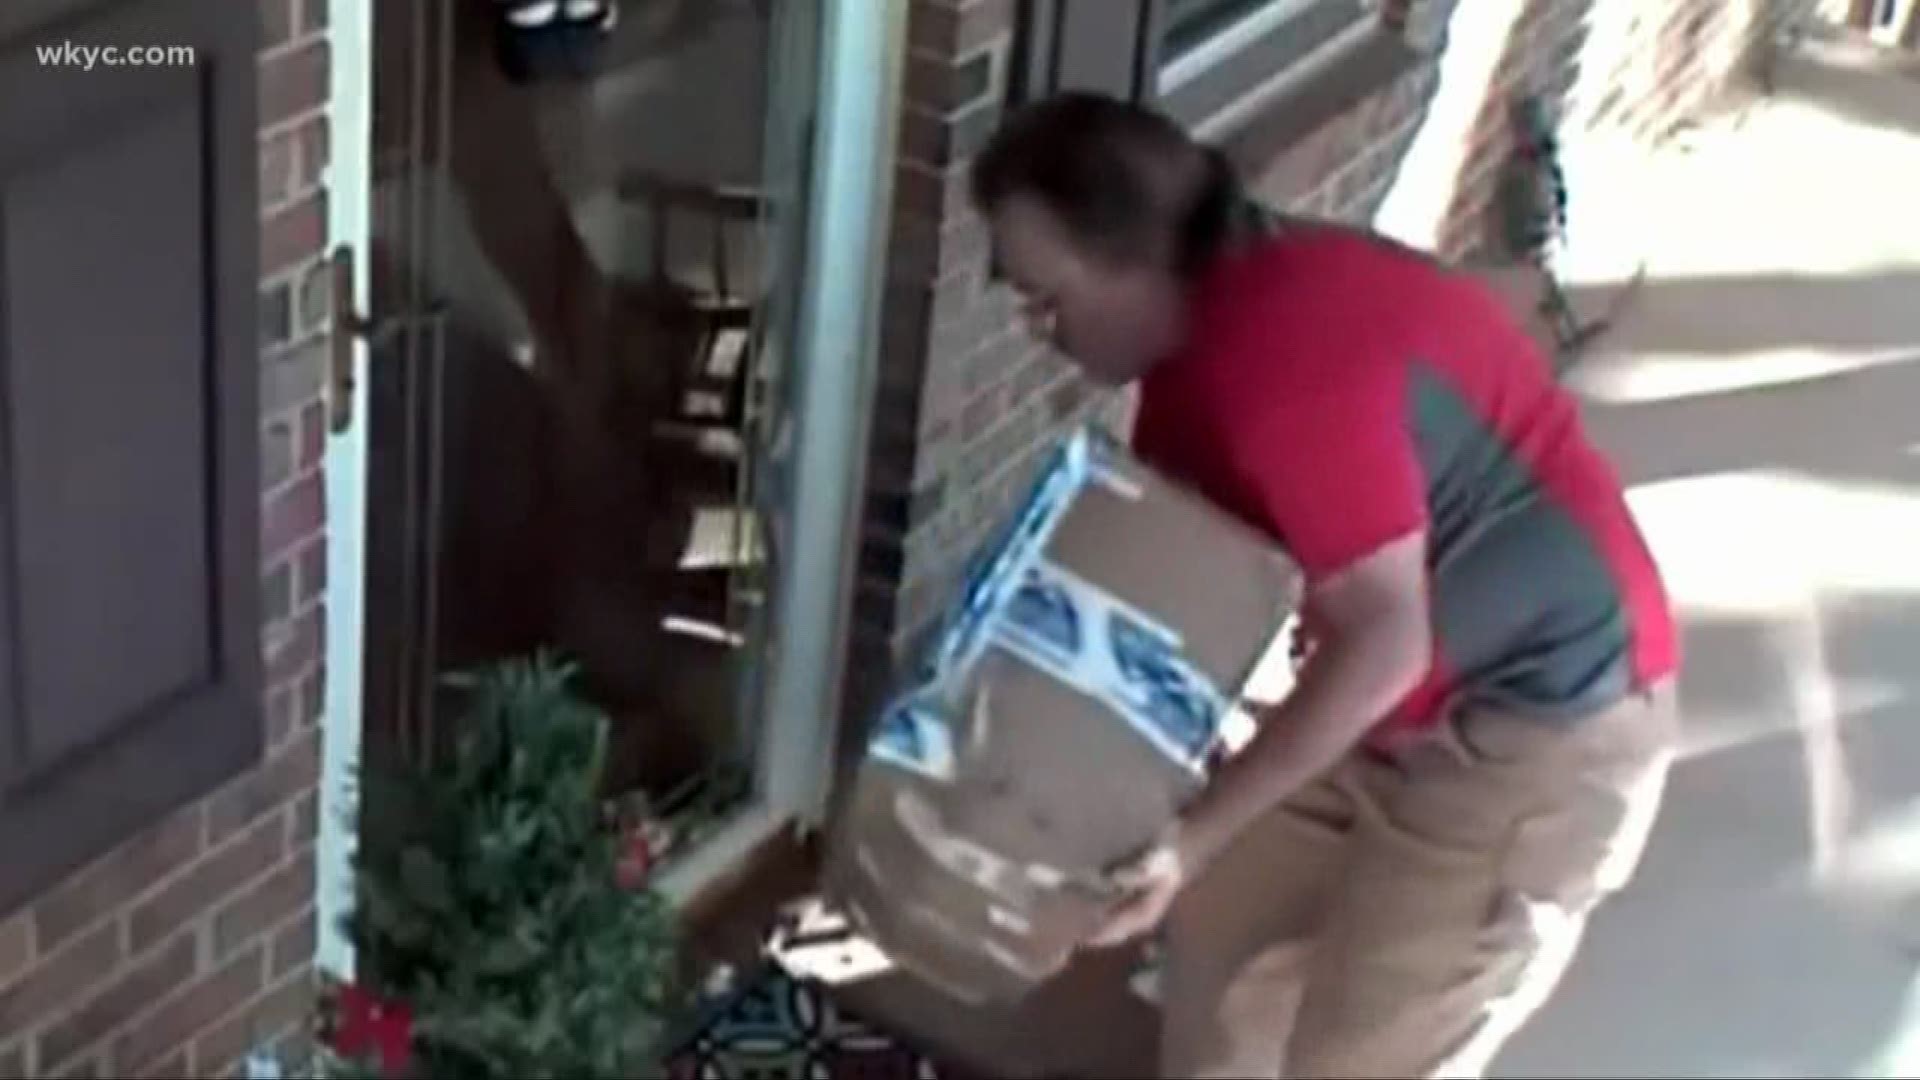 Some of the packages you see on porches this holiday season may be bugged. Authorities are targeting porch pirates this holiday season.